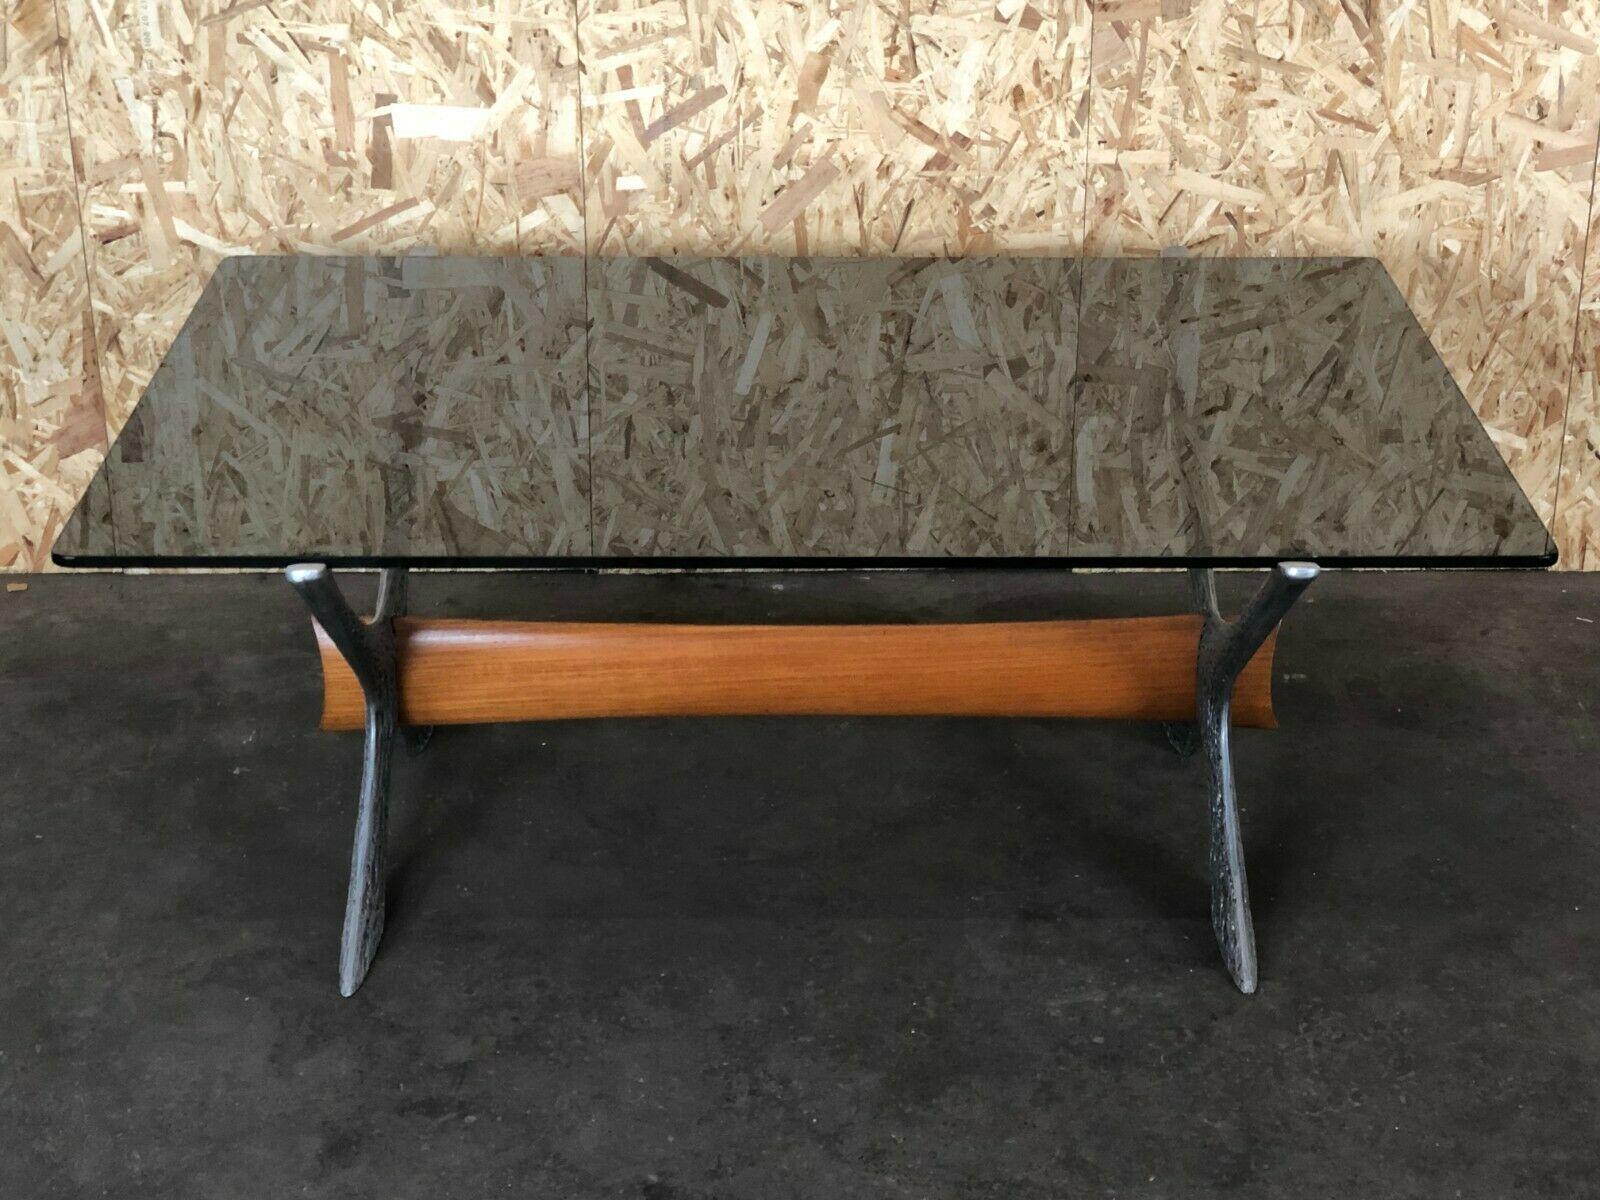 60s 70s Coffee table coffee table glass top metal teak 60s 70s.

Object: coffee table

Manufacturer:

Condition: good

Age: around 1960-1970

Dimensions:

135cm x 94cm x 52cm

Other notes:

The pictures serve as part of the